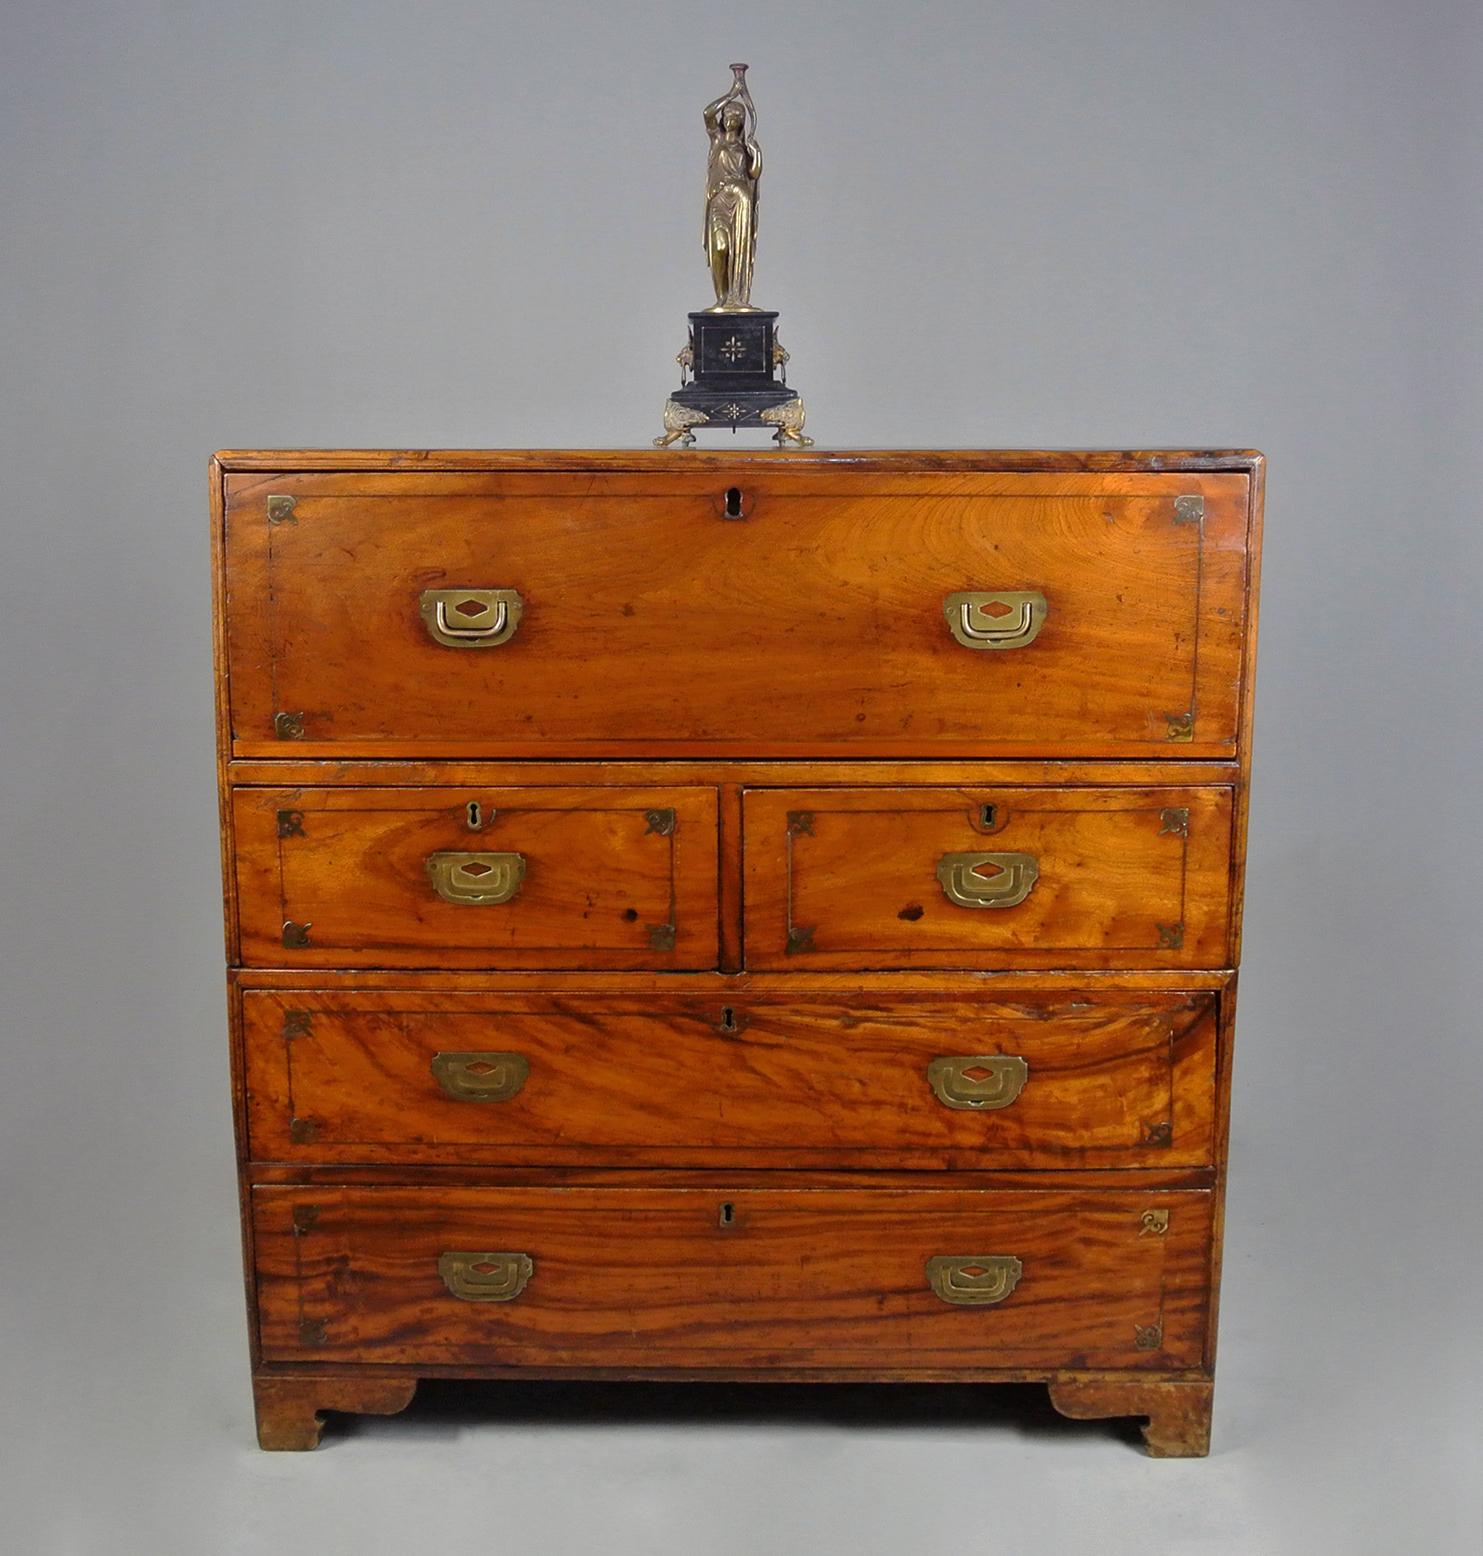 An exceptional and original Georgian campaign chest with brass inlays and original flush brass handles and having an absolutely superb colour with wonderful chatoyancy to the timber and rich natural patina.

The interior with two banks of short